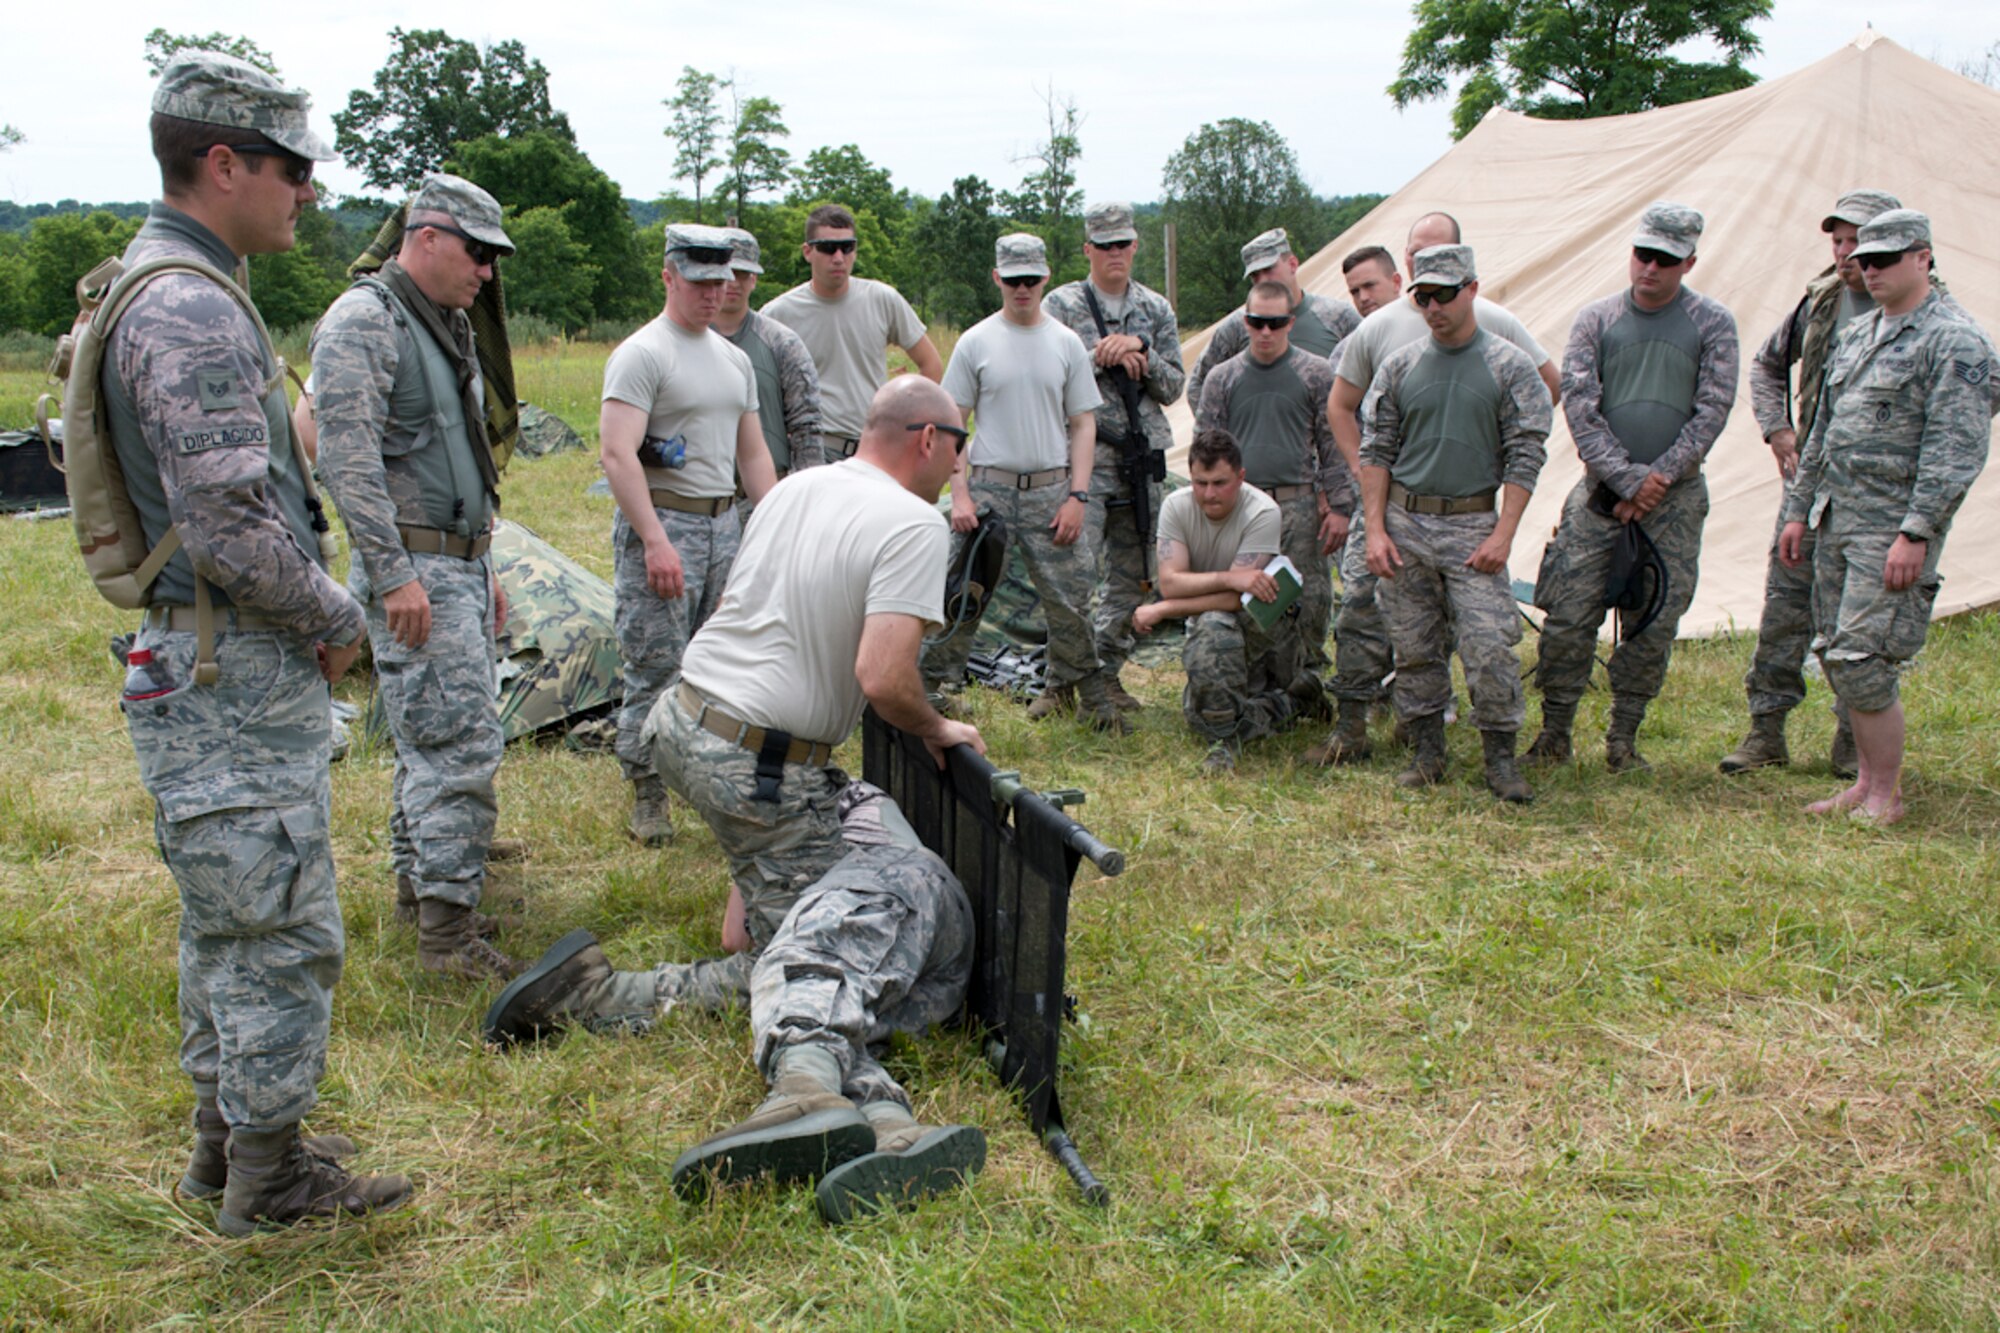 Tech. Sgt. Glenn Macher demonstrates litter techniques during the 167th Security Forces Squadron field training event in Gerrardstown, W.Va., June22. (U.S. Air National Guard photo by Senior Master Sgt. Emily Beightol-Deyerle)